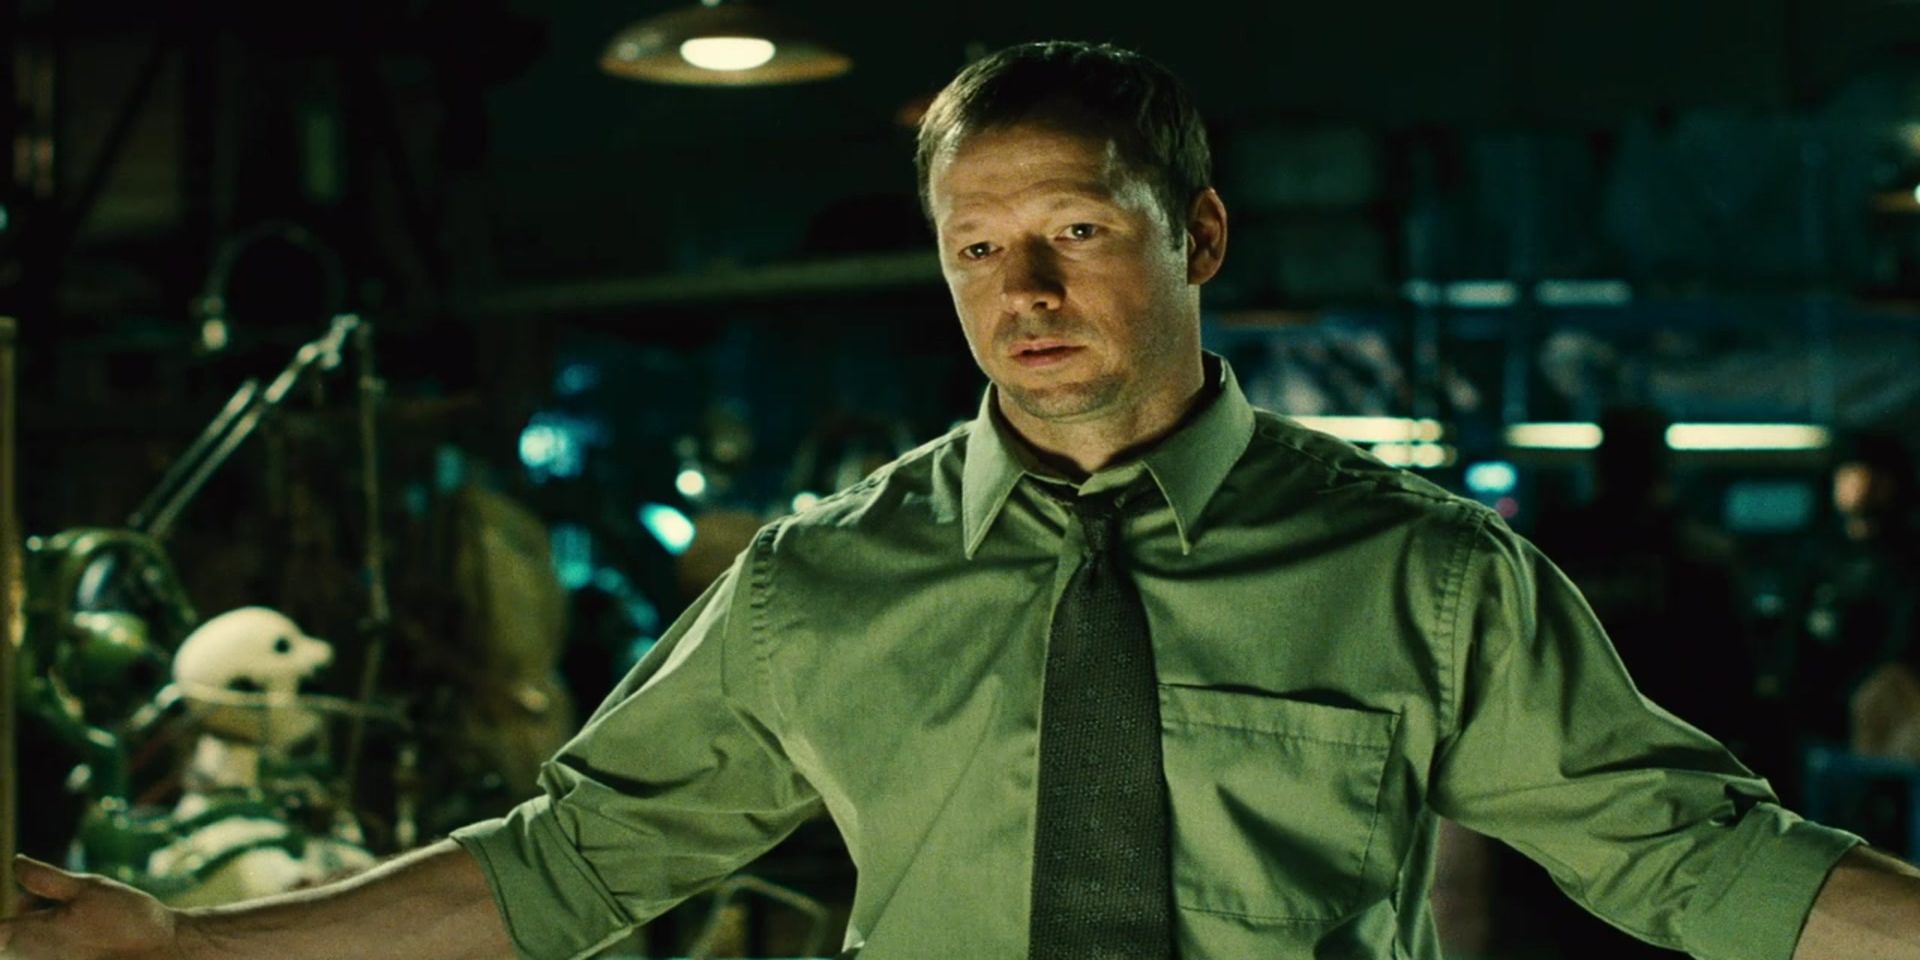 Detective Matthews with his arms open in Saw II.